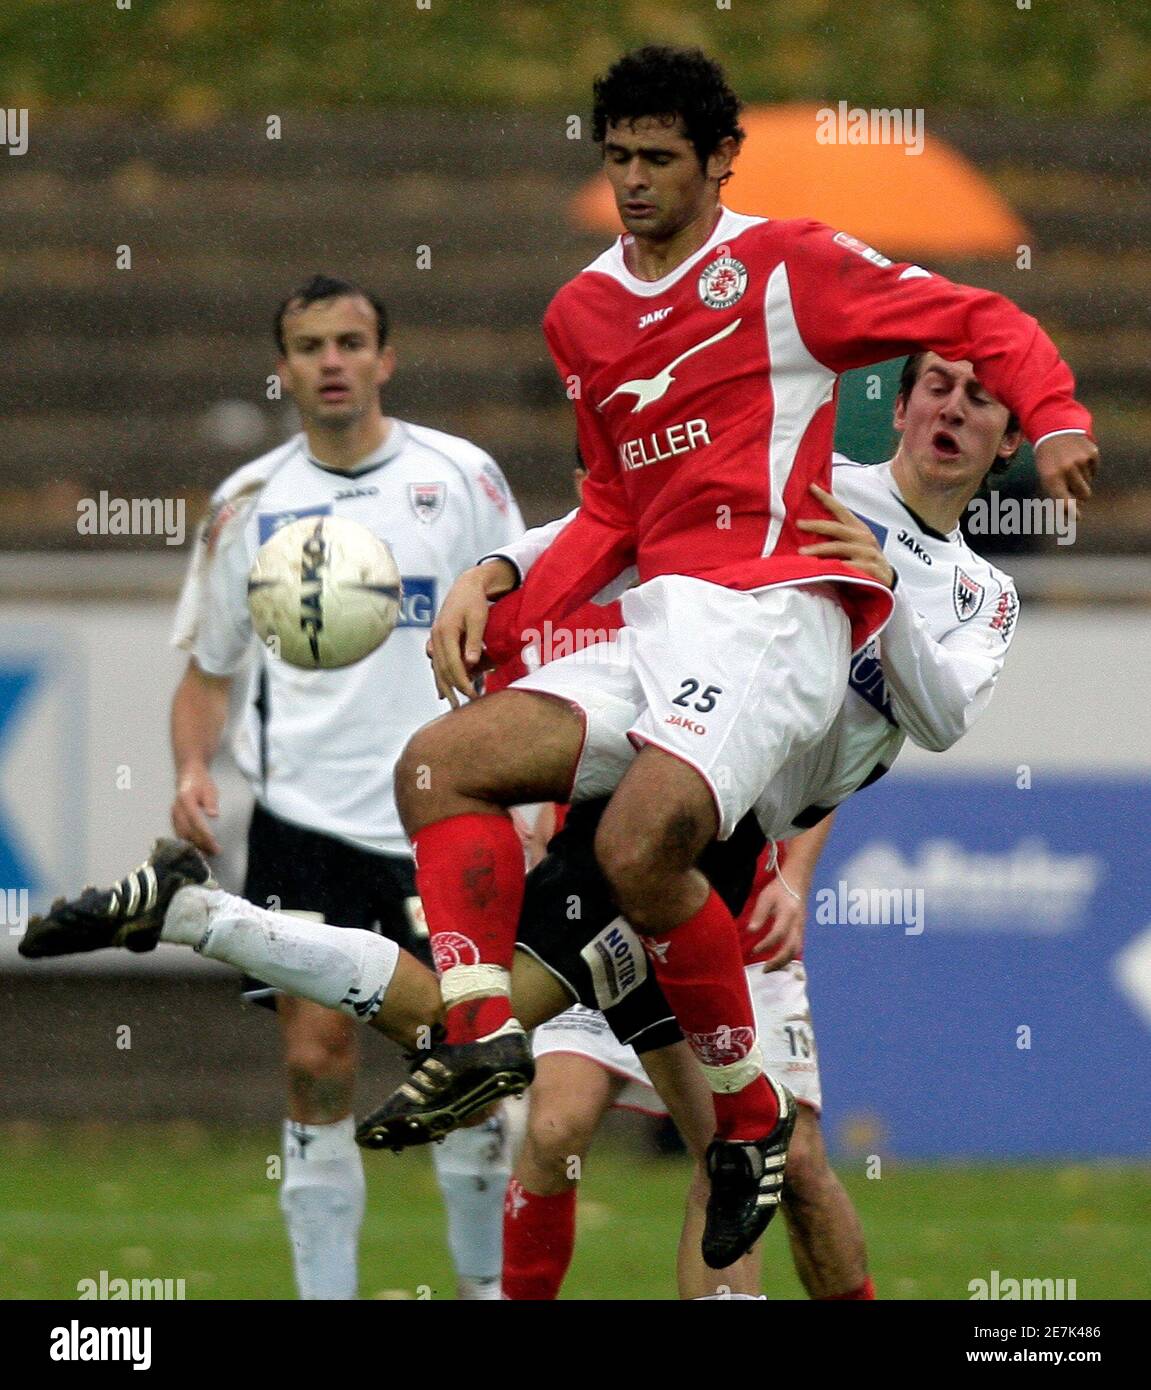 FC Winterthur's Ricorda Costa (L) fights for the ball against FC Aarau's  Sandro Burki during their Swiss Cup soccer match in Winterthur November 12,  2006. REUTERS/Andreas Meier (SWITZERLAND) REUTERS Stock Photo - Alamy